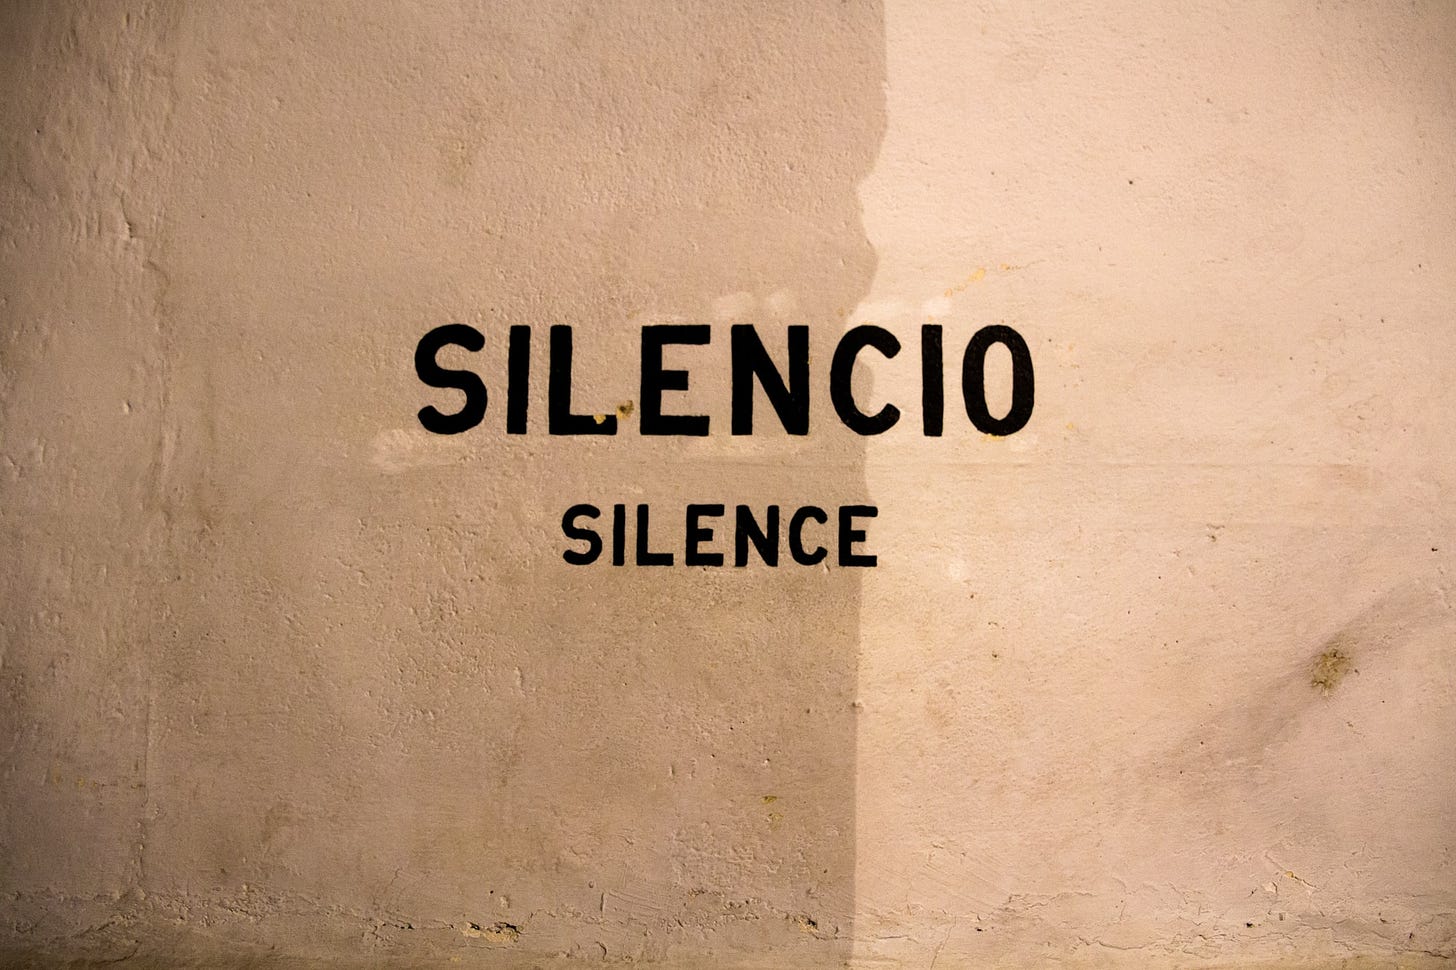 Let's Talk About Silence